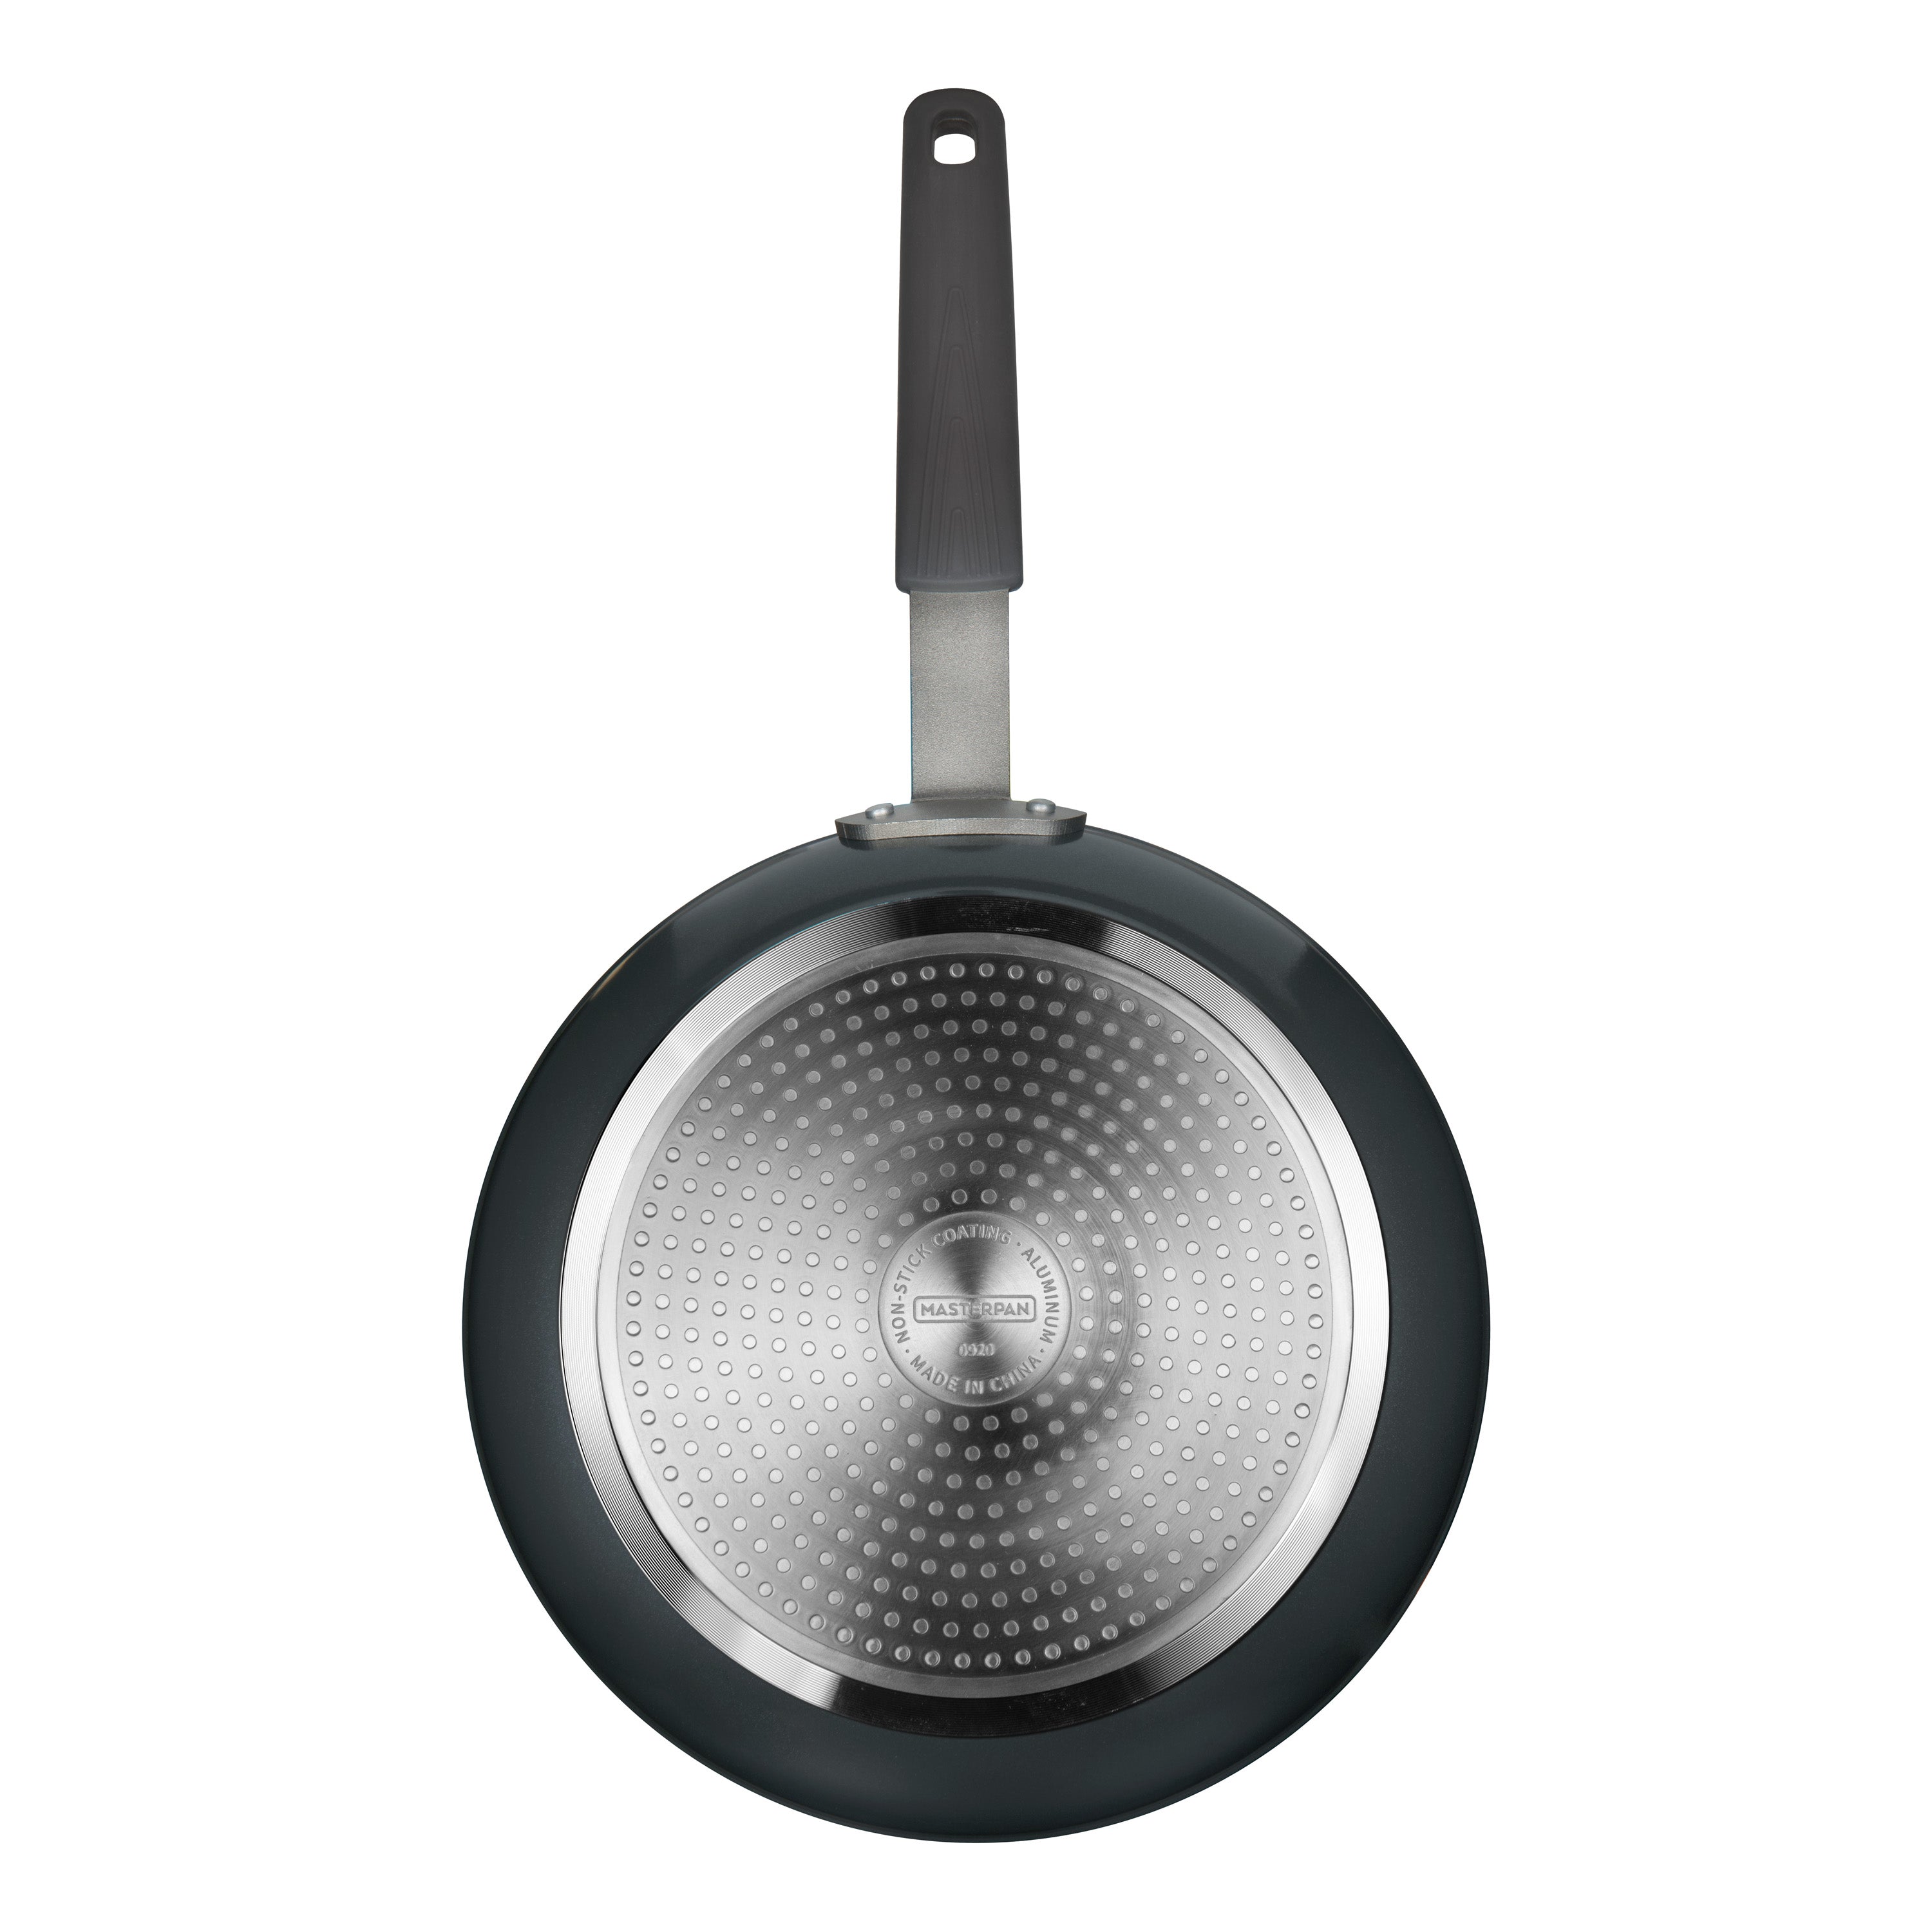 MasterPan MP-155 10 in. Non-Stick Aluminium Cookware Grill Pan with Stainless Steel Chefs Handle